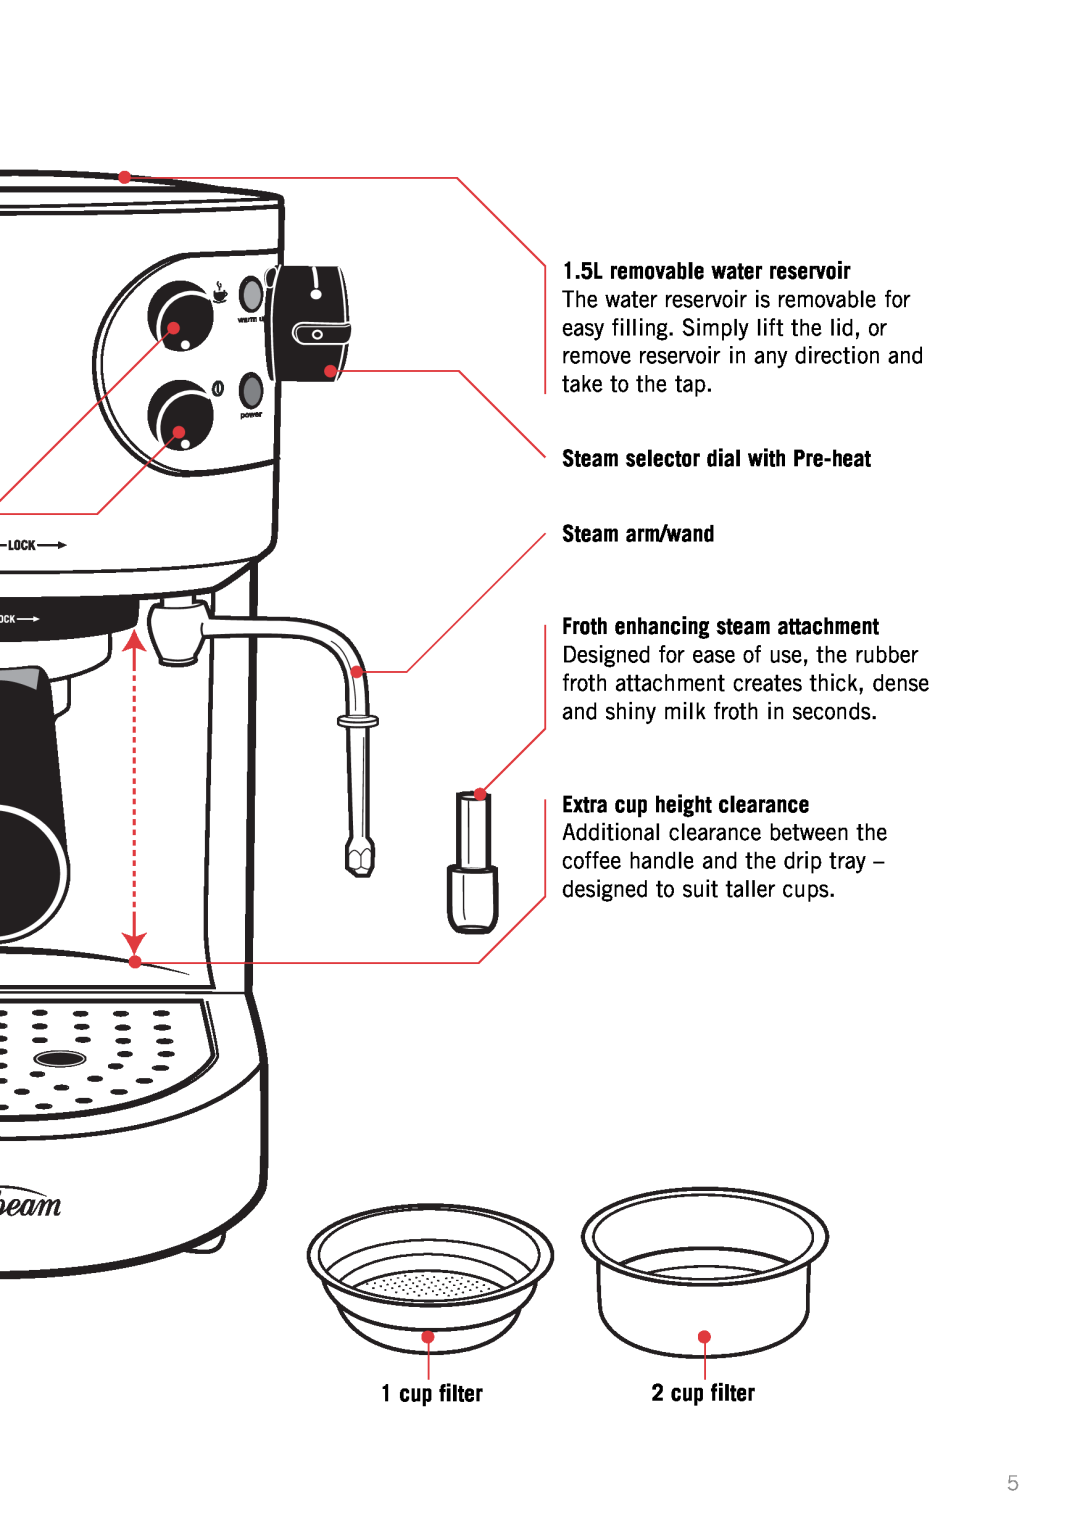 Sunbeam EM2300 manual 1.5L removable water reservoir, Steam selector dial with Pre-heat Steam arm/wand, cup filter 